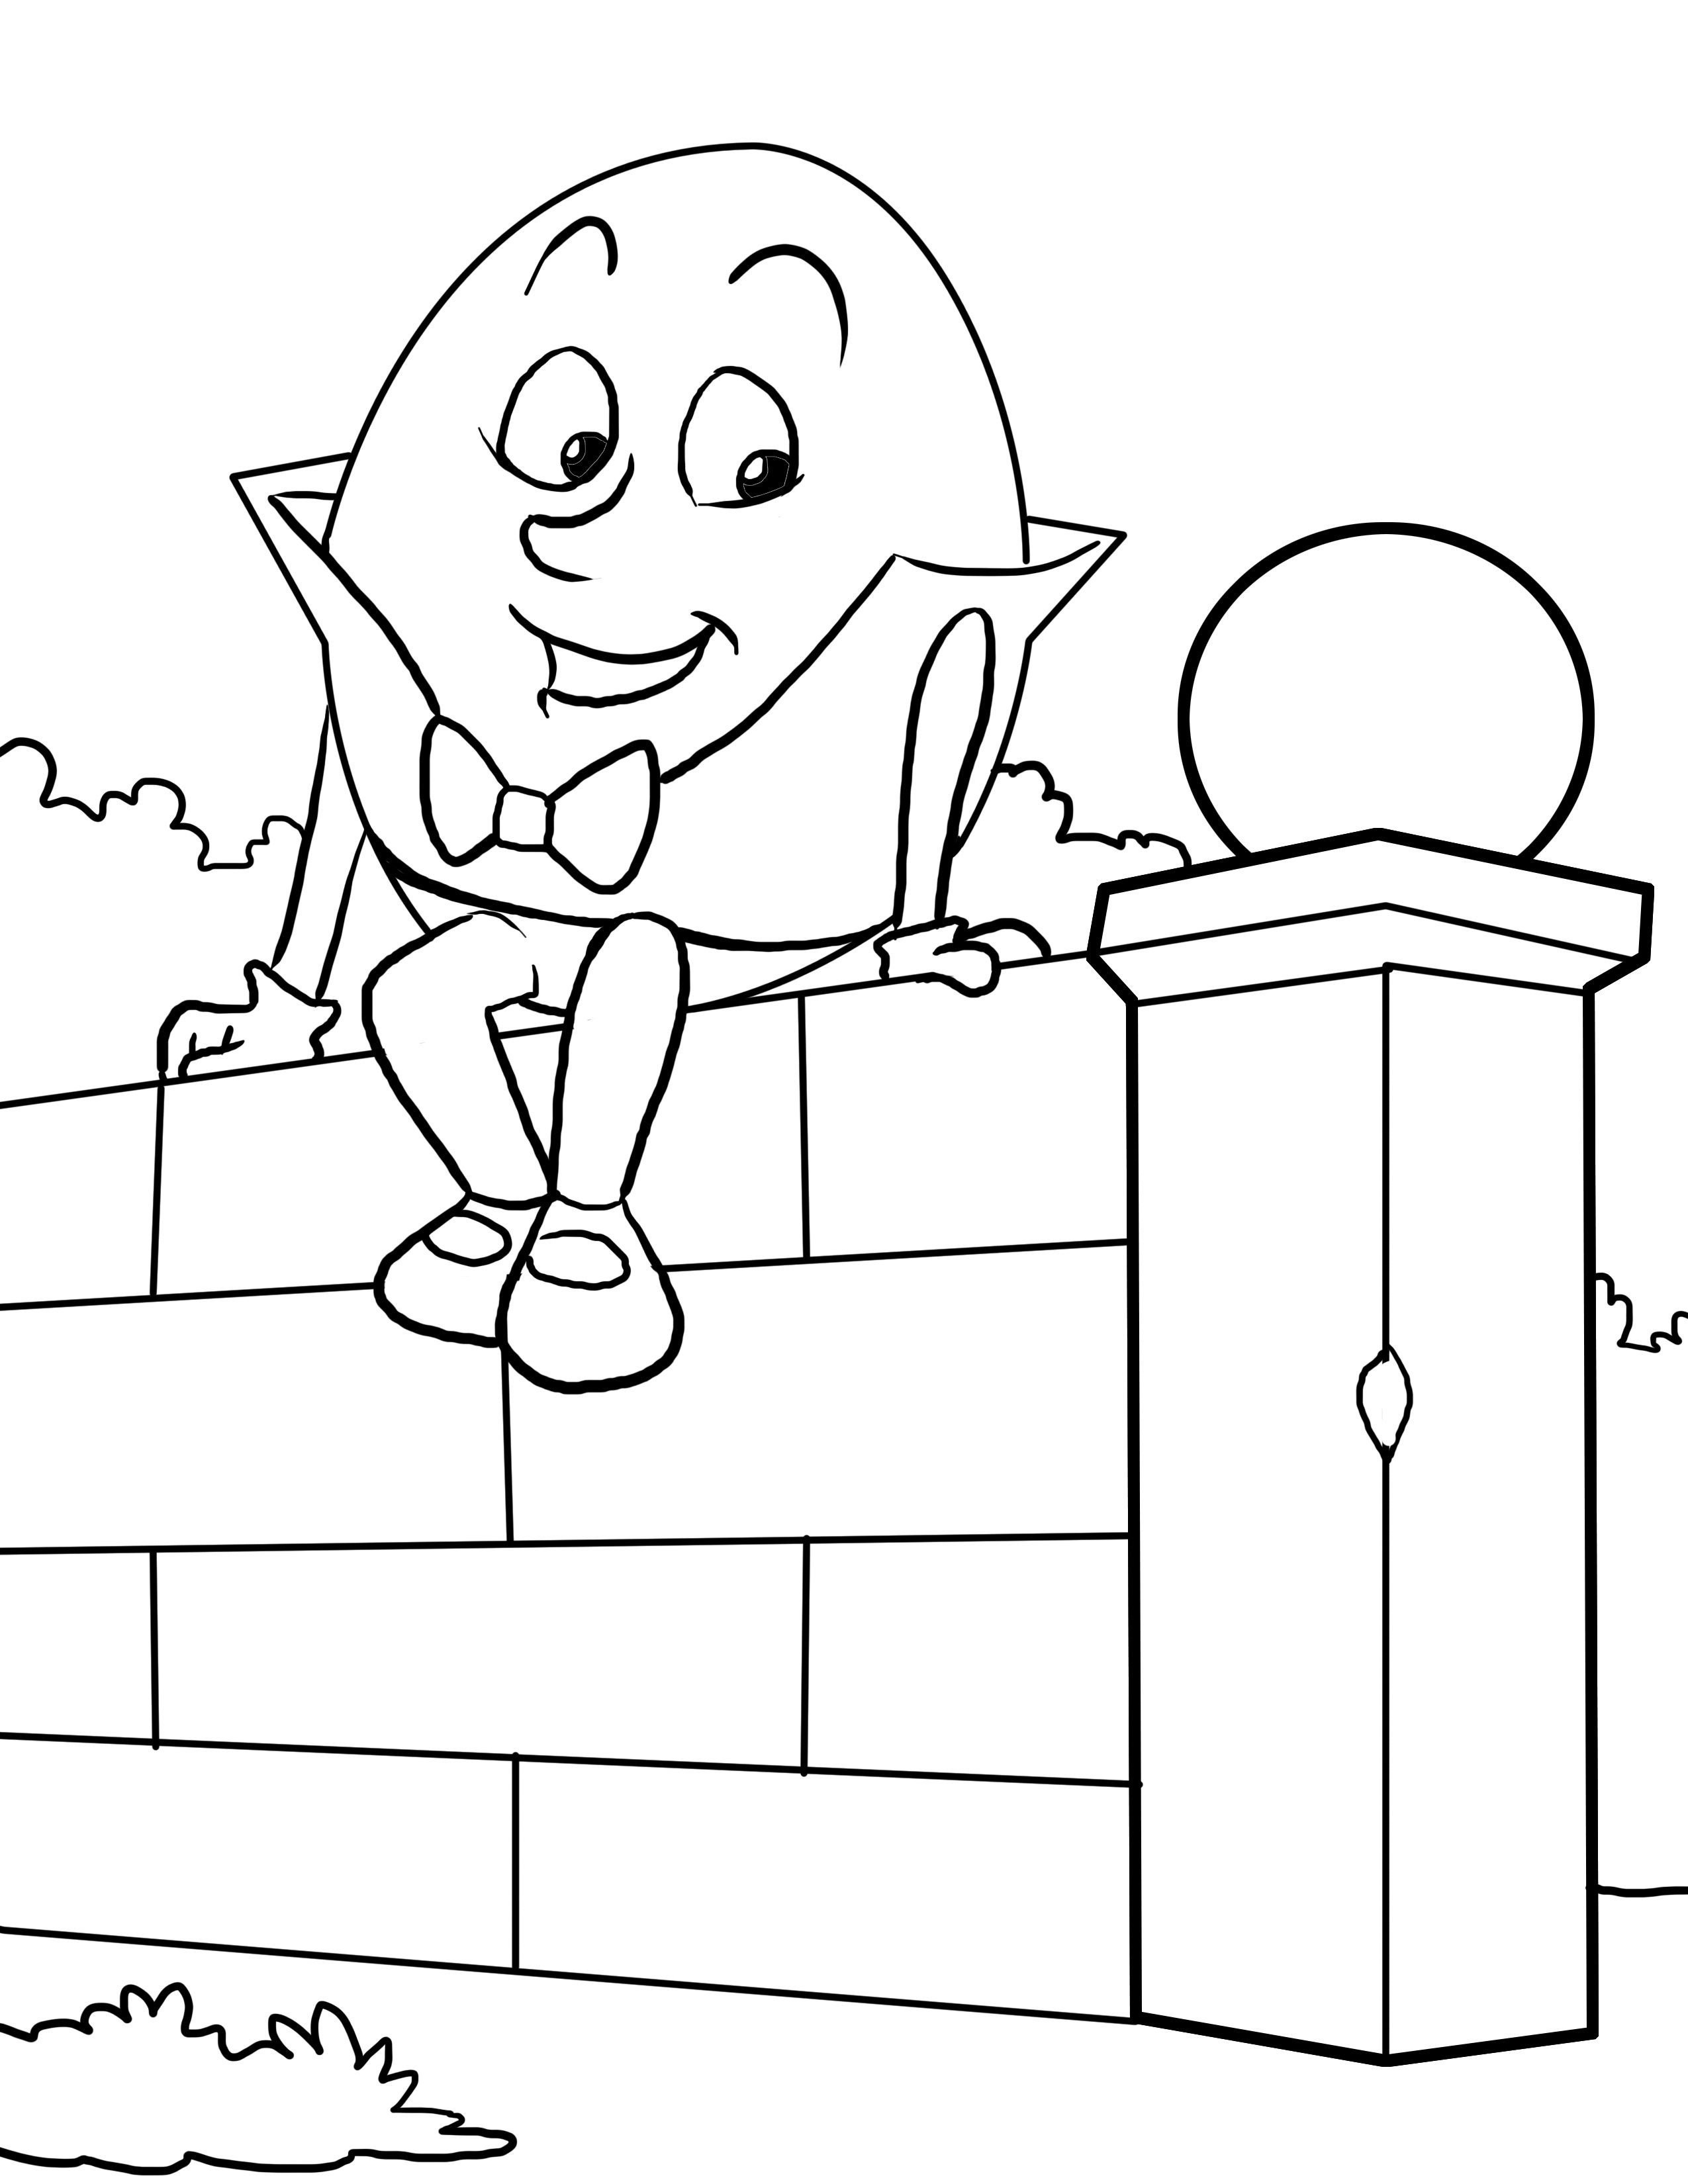 humpty-dumpty-clipart-colouring-page-humpty-dumpty-colouring-page